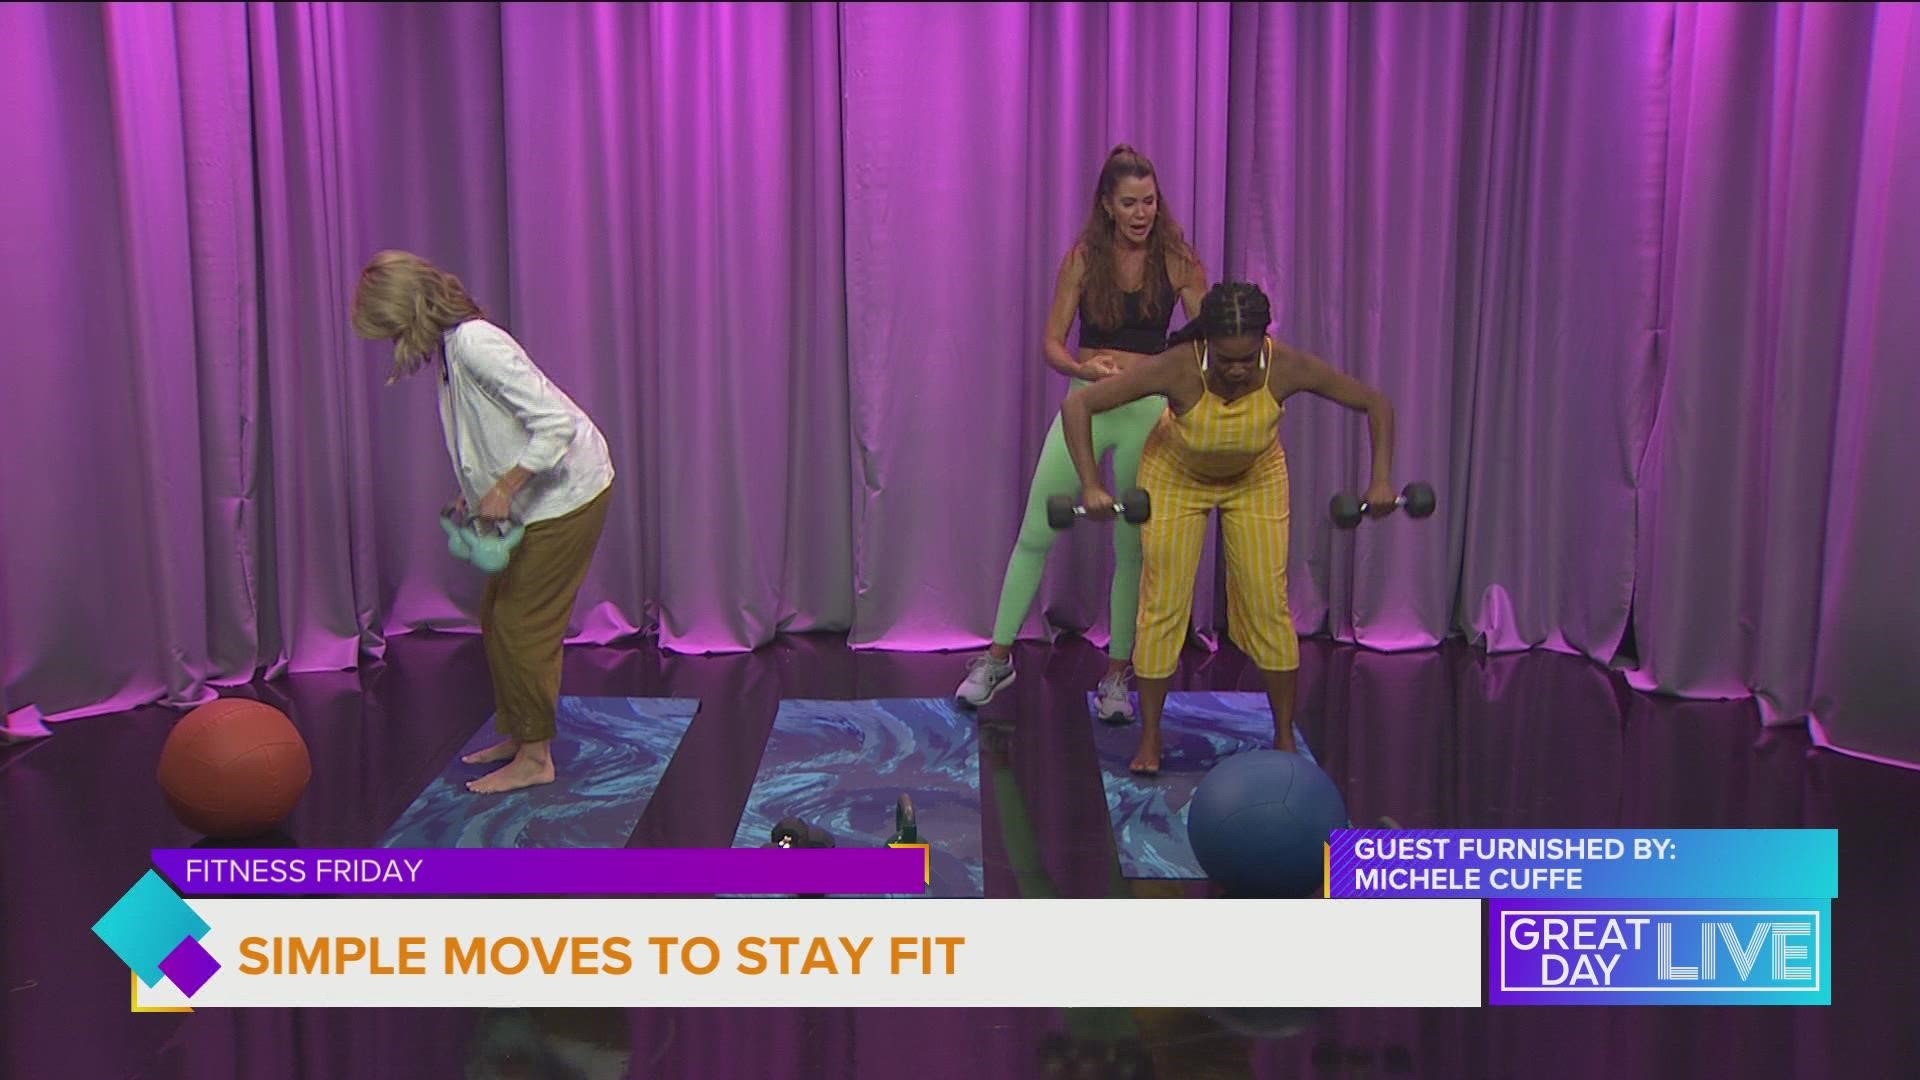 Personal trainer Michele Cuffe shows us quick and easy exercises anyone can do at home to work the entire body.